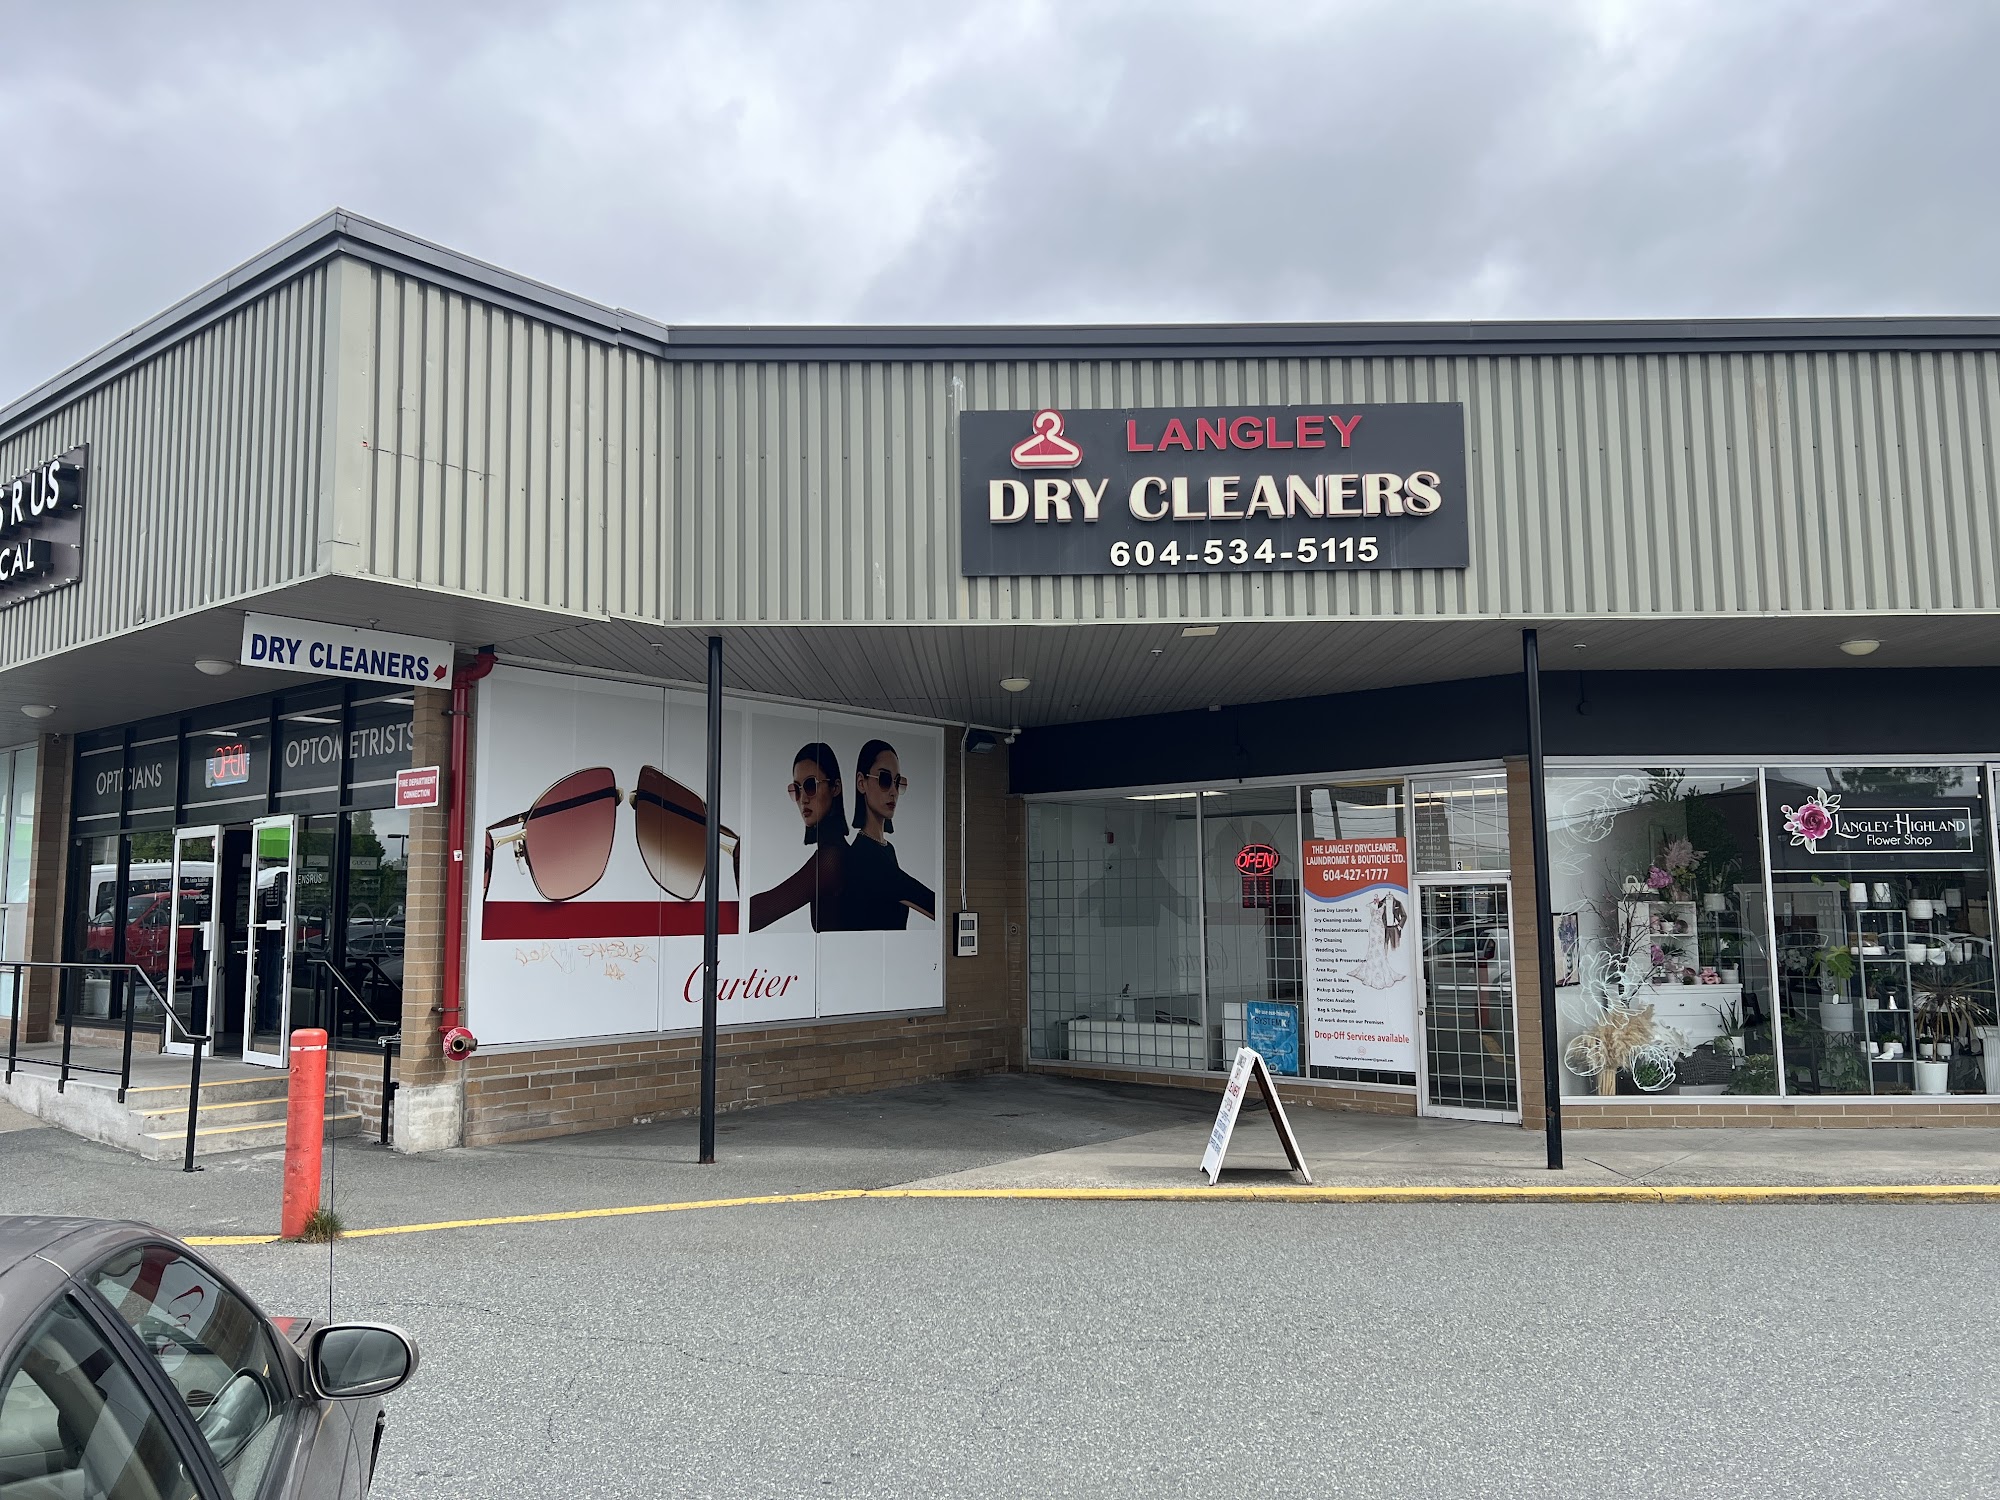 The Langley Drycleaner, Laundromat and boutique Ltd.